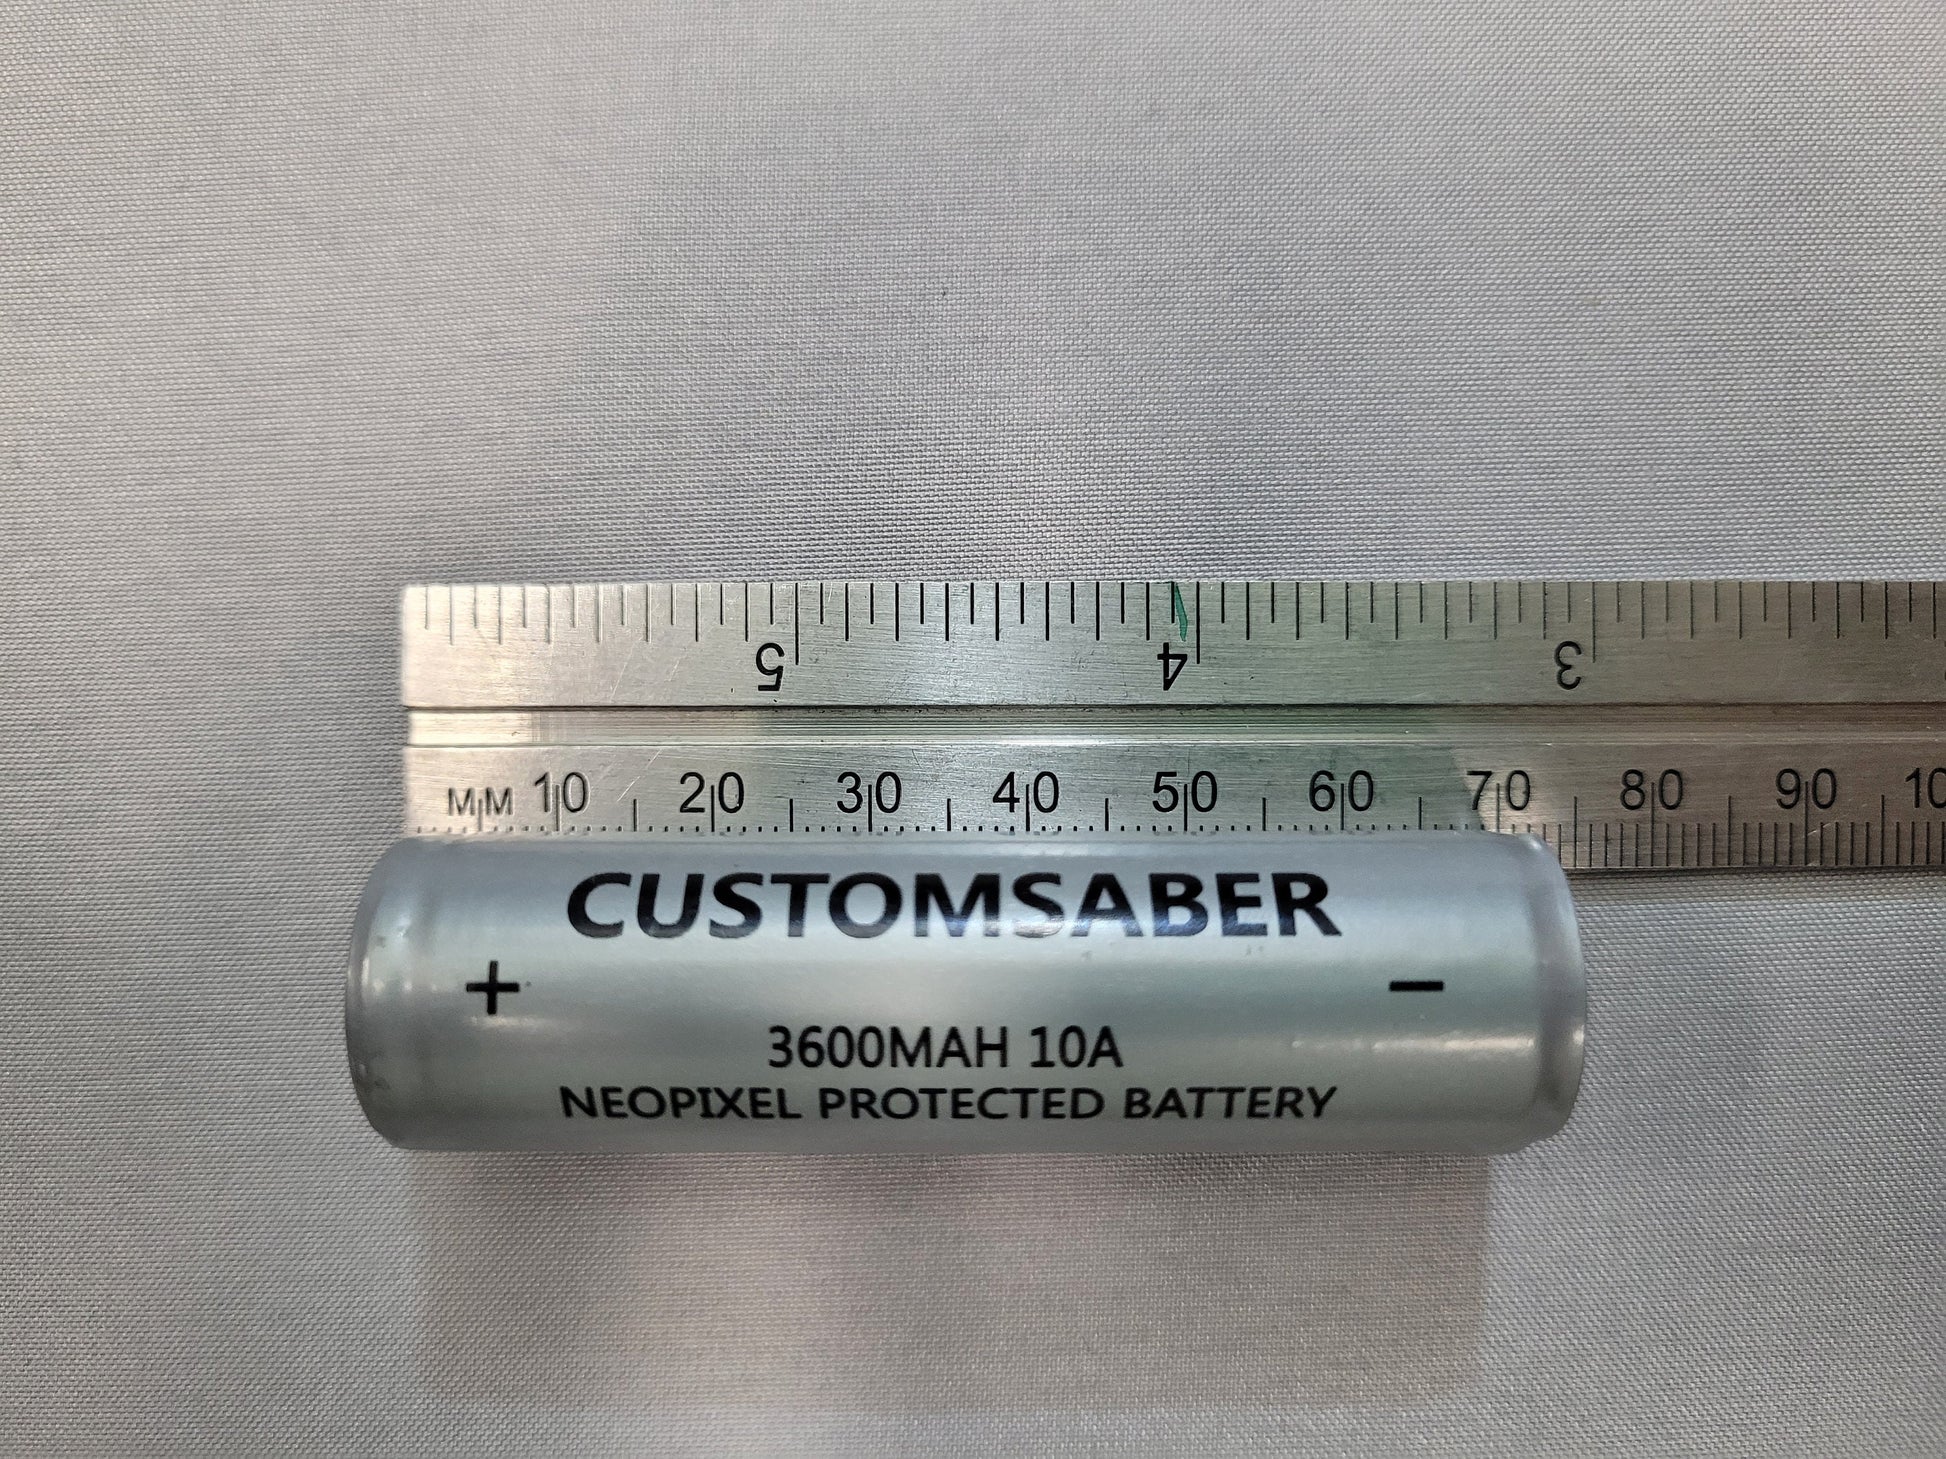 Lightsaber Pixel Battery - Rechargeable Works with Pixel RGB saber and others 70mm Long Battery, Spare Battery, Backup Power, Bossaber